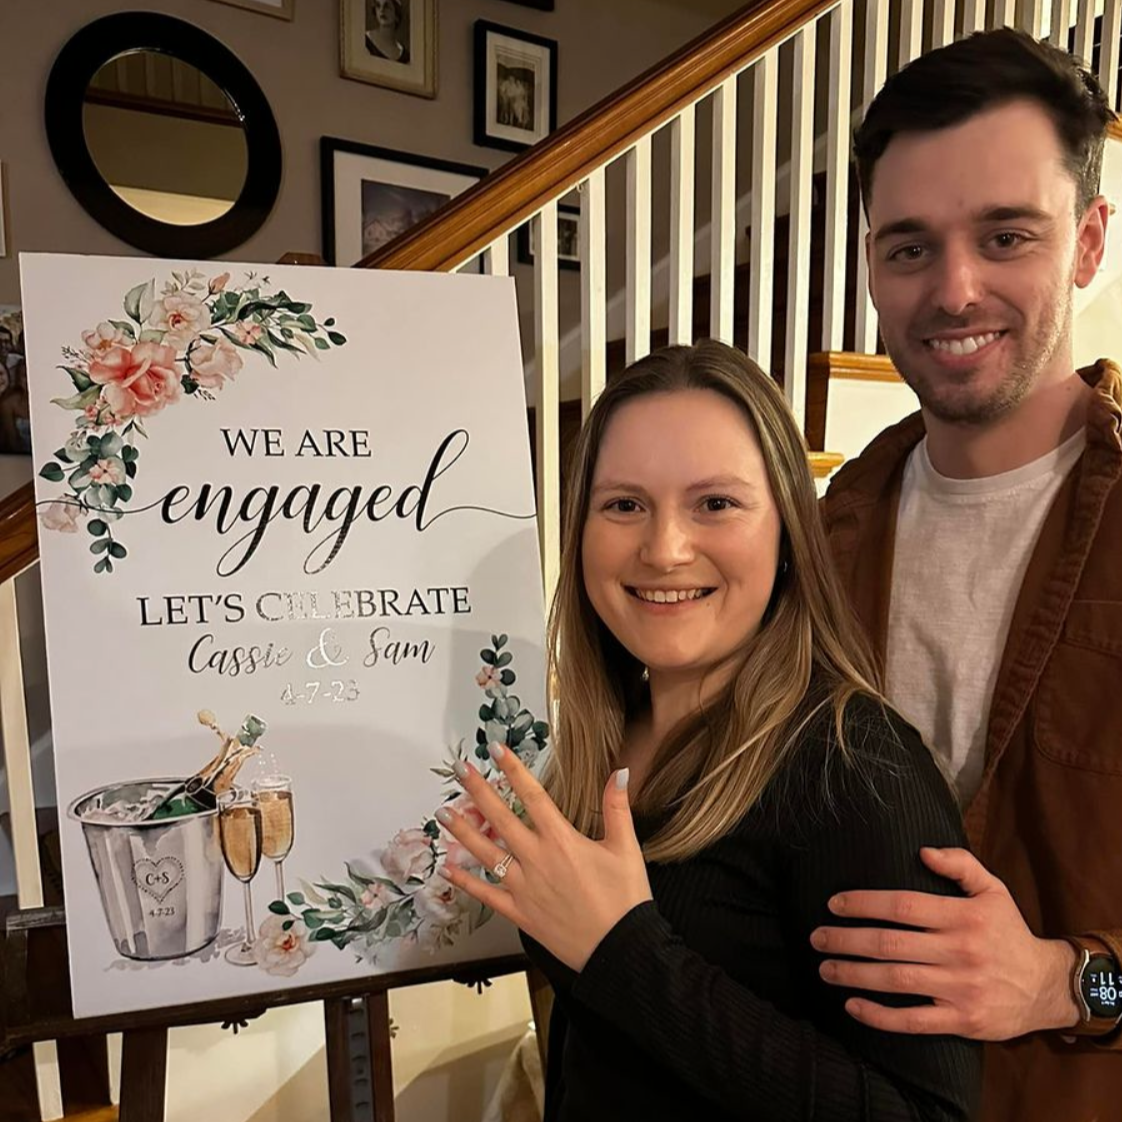 Engagement Party Etiquette: Do's and Don'ts for Guests, Gifts and More